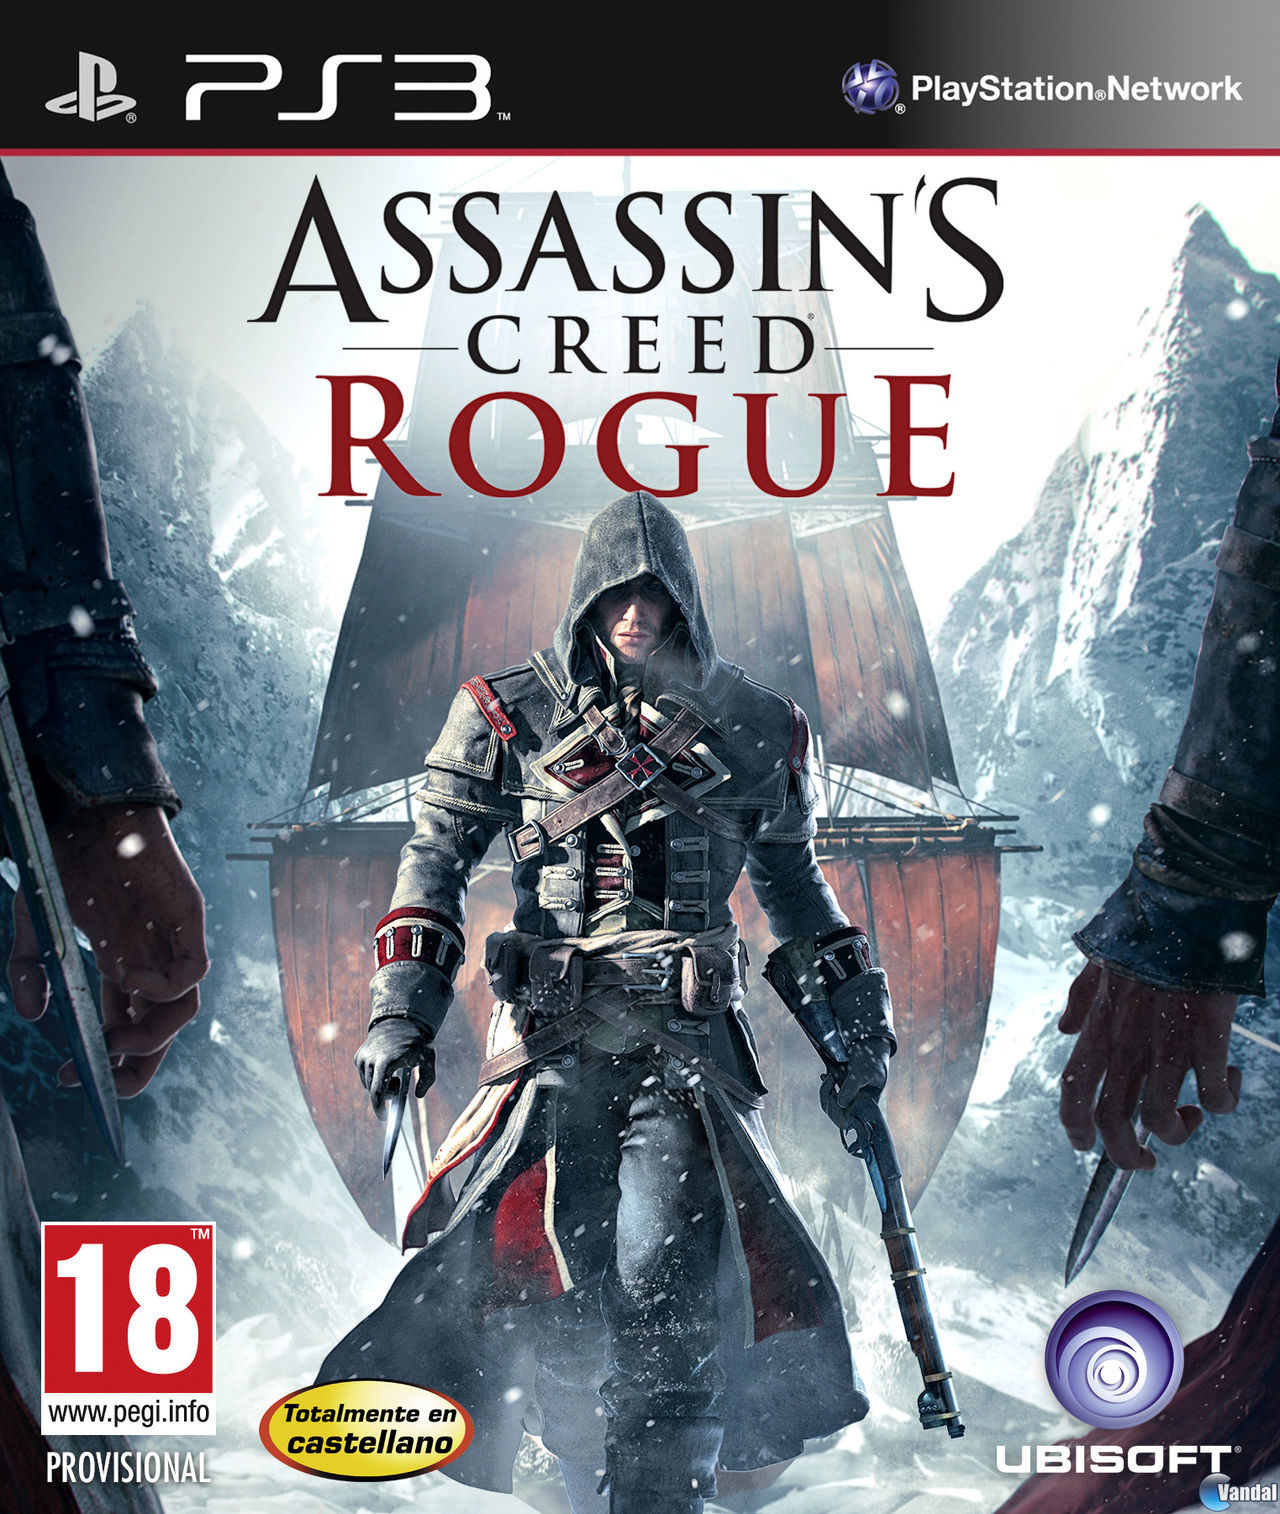 Assassin's Creed Rogue - Videojuego (PS3, Xbox 360 y PC) - Vandal